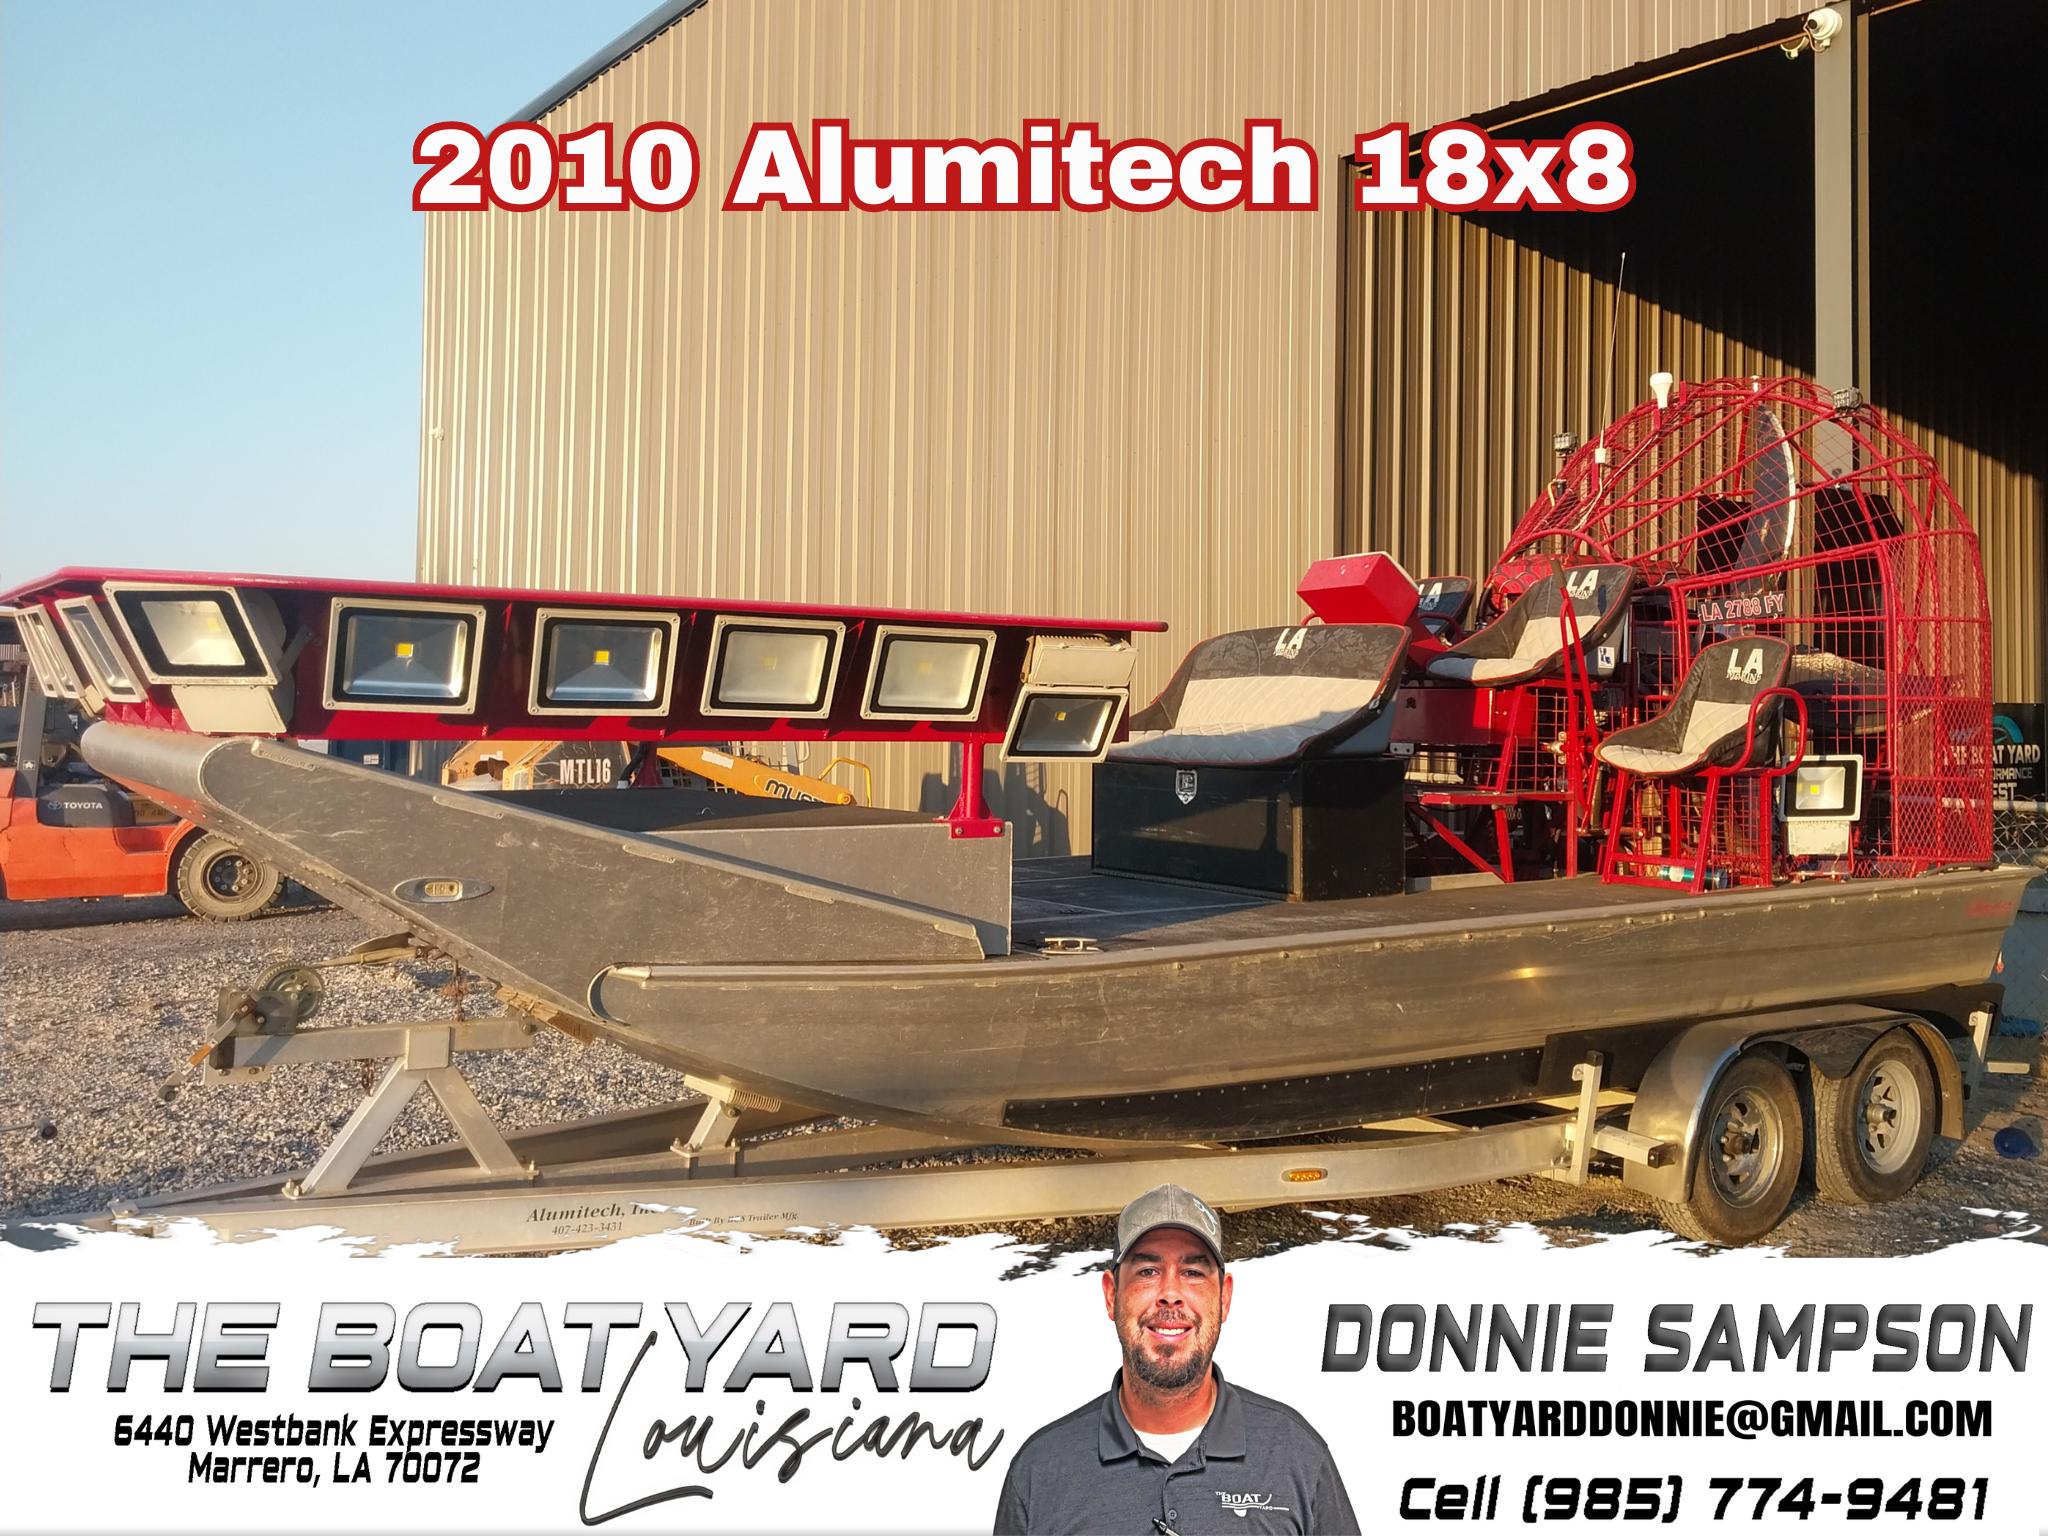 2010 Airboat 18x8